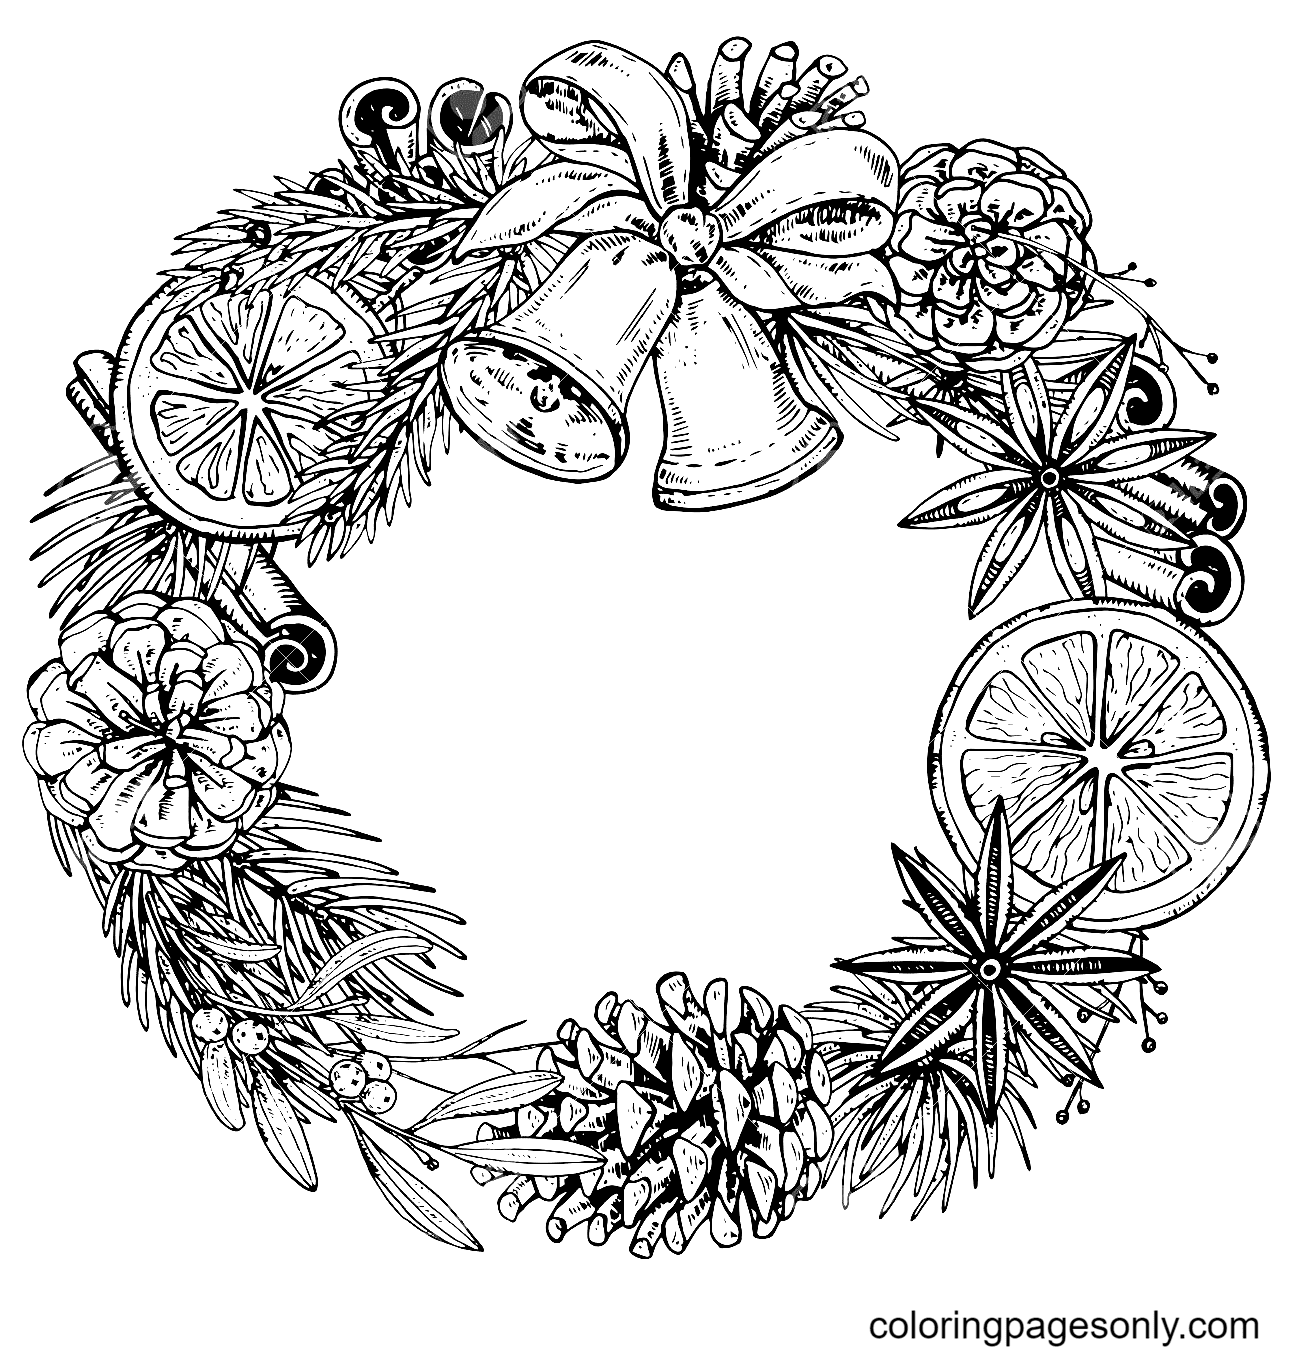 Merry Christmas Wreath With Pine Cones, Spices, Bells Coloring Pages